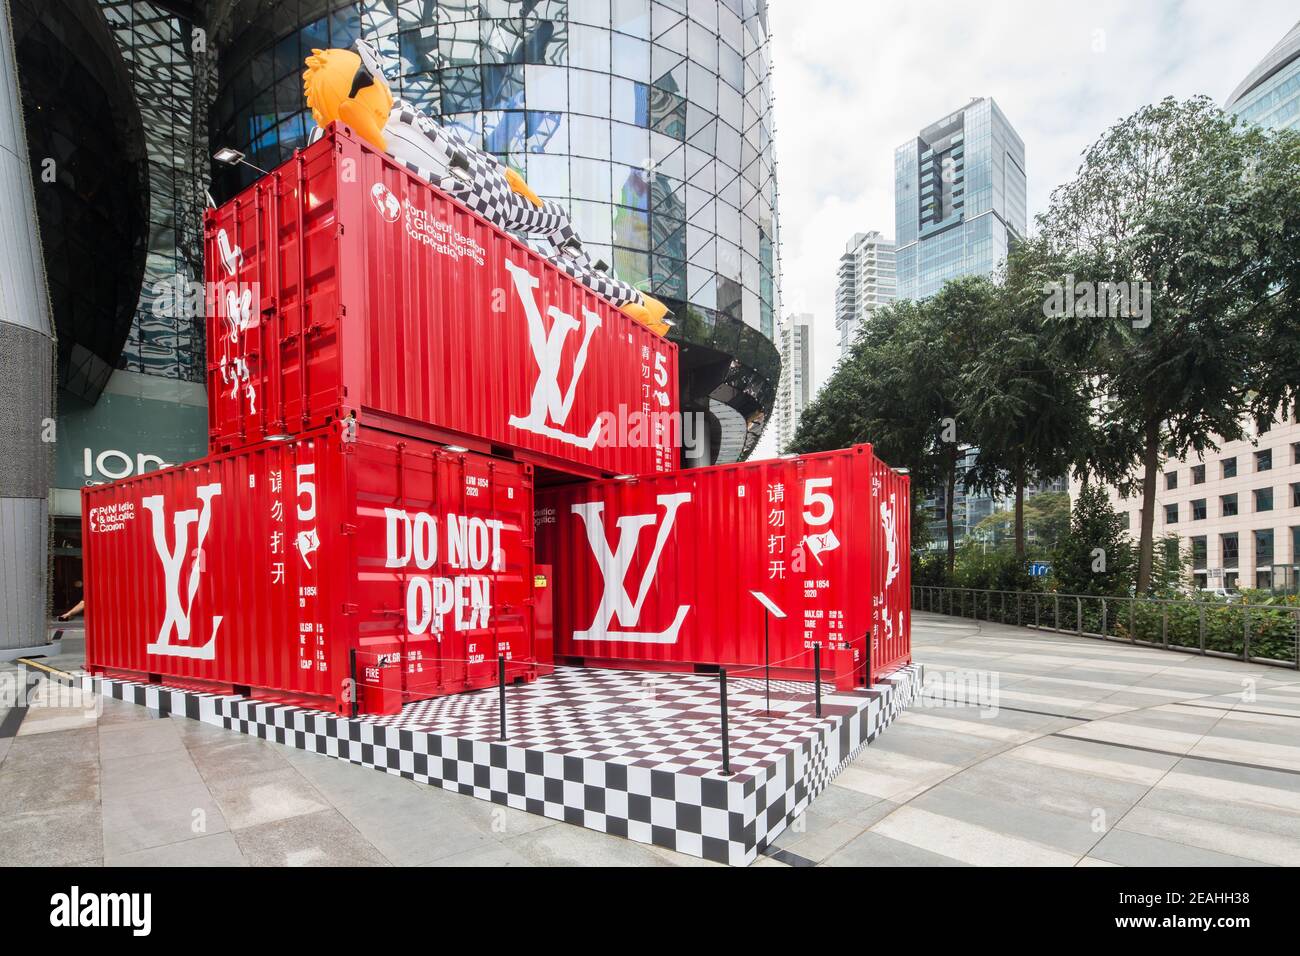 Louis Vuitton and Virgil Abloh's pop-up store has opened